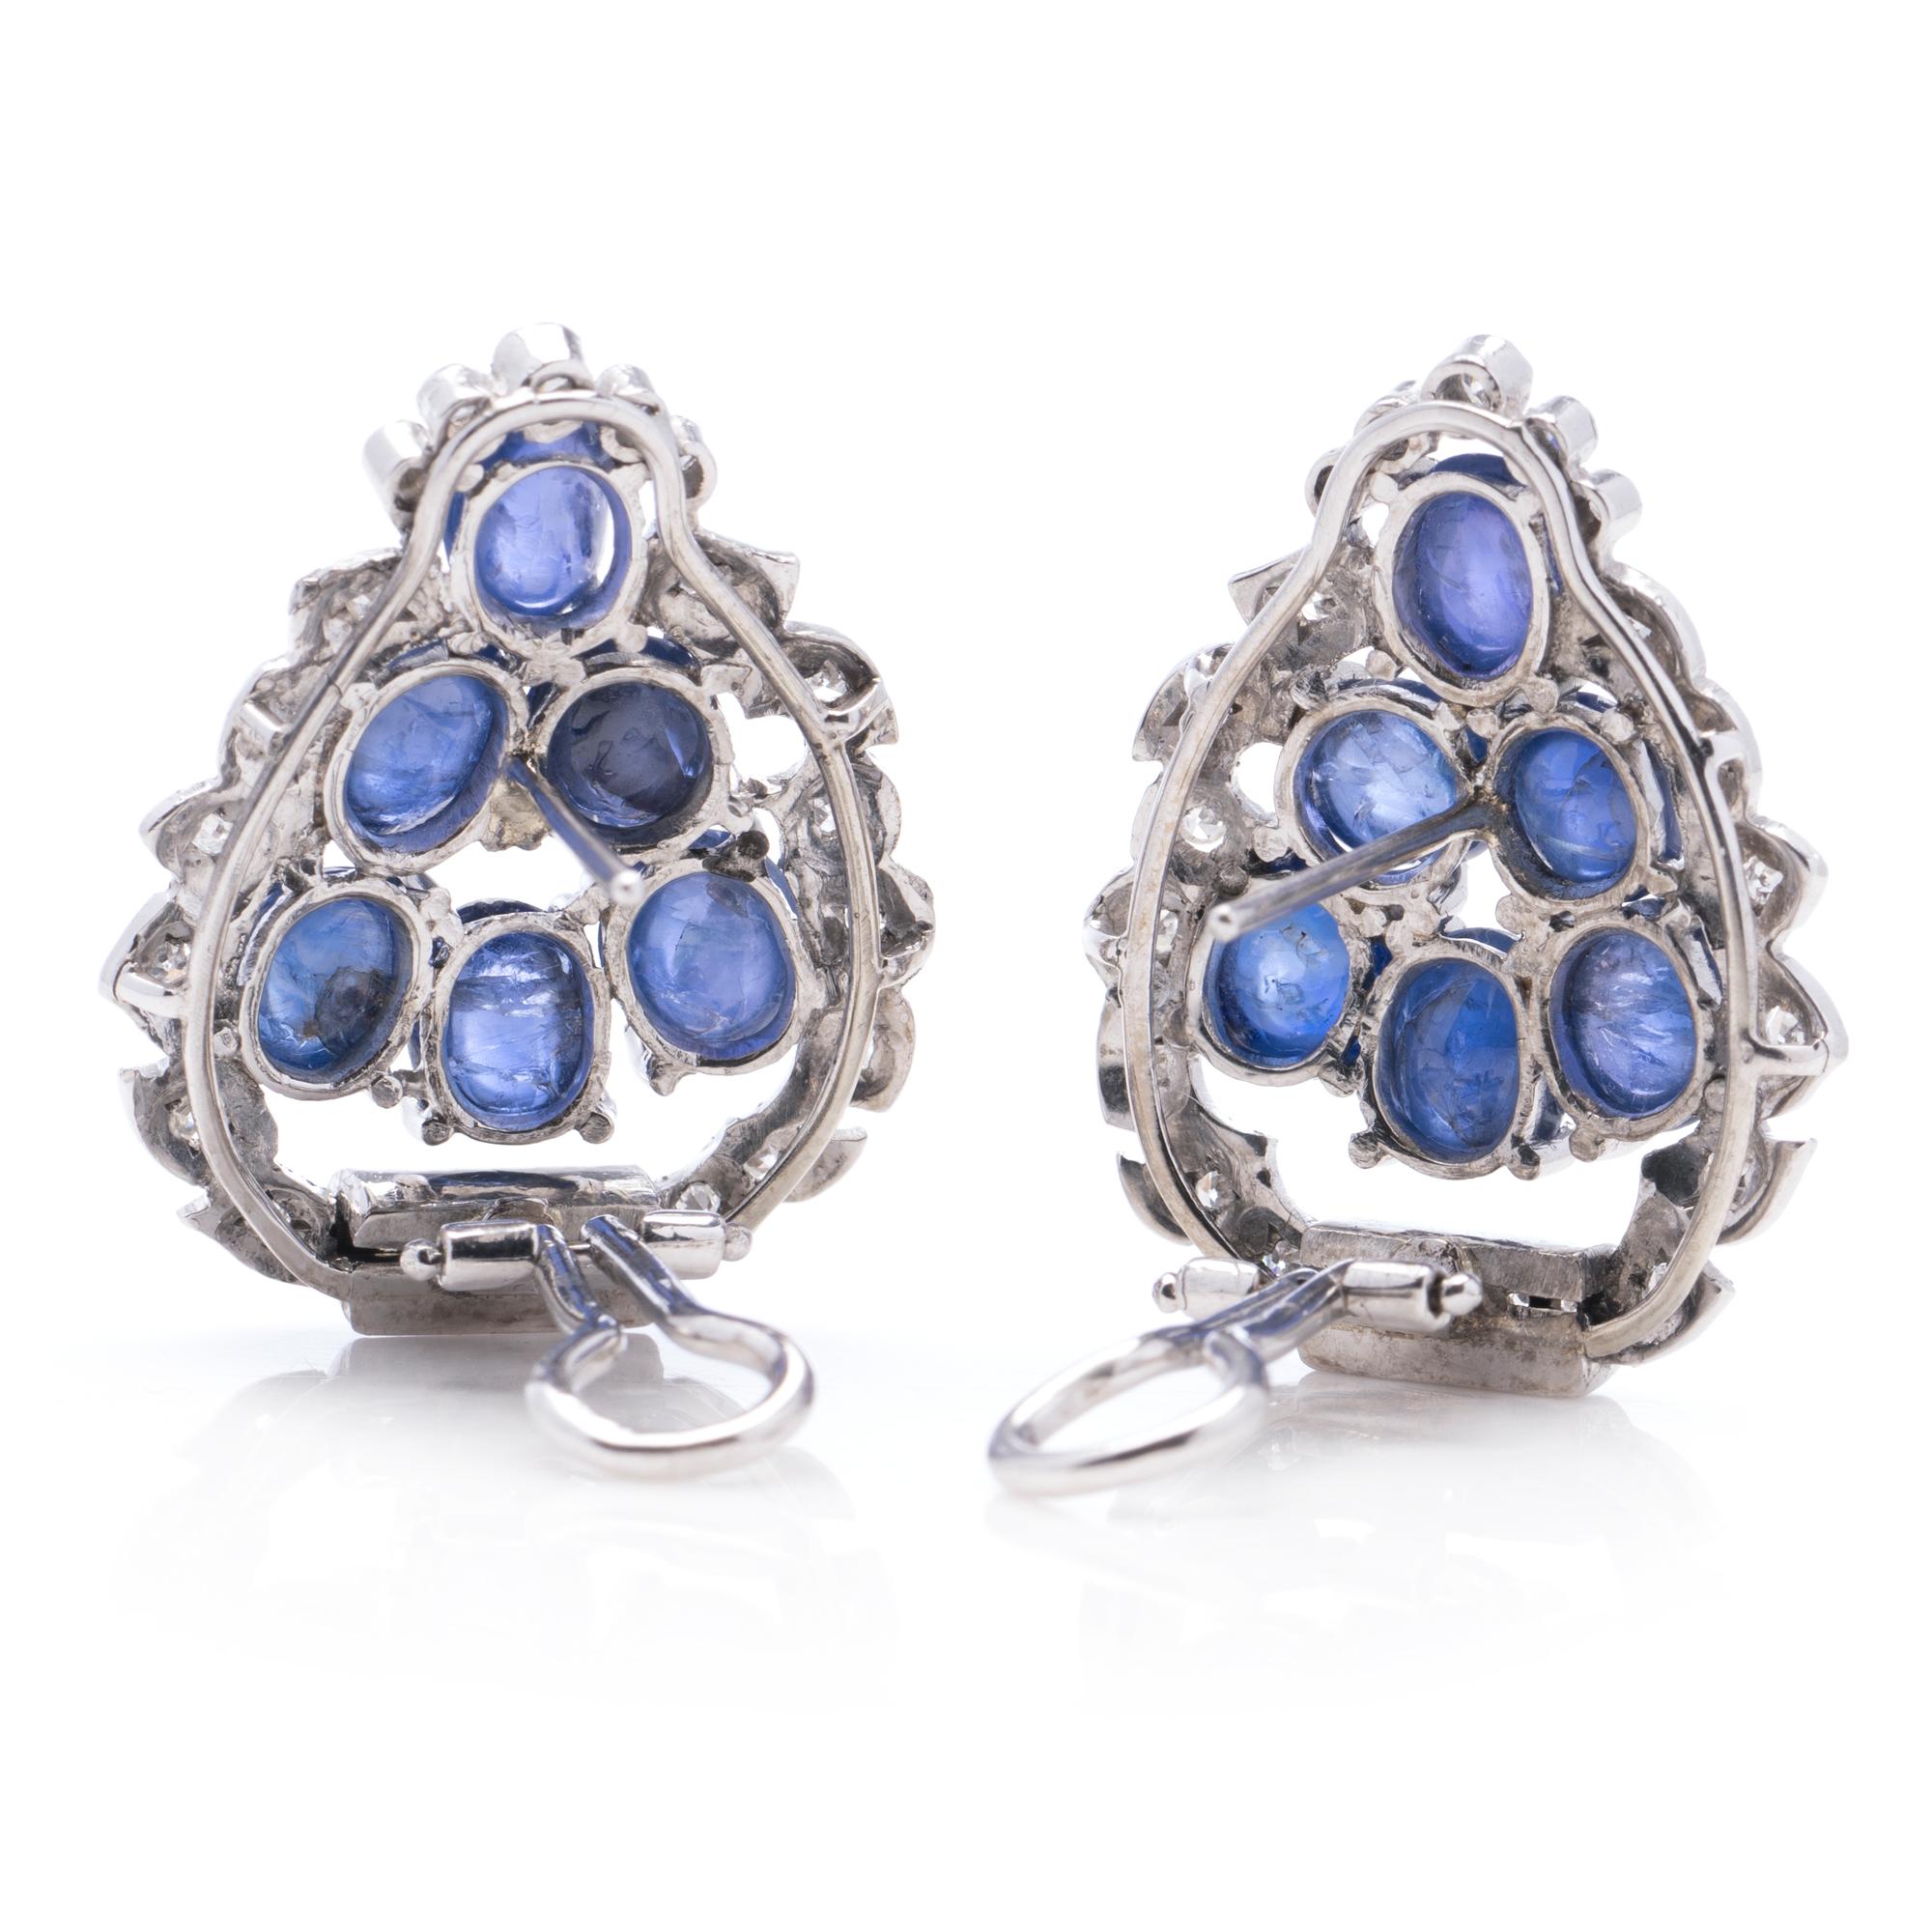 Women's 18k Gold Leaf-Shaped Earrings with Natural Cabochon Sapphires and Diamonds For Sale